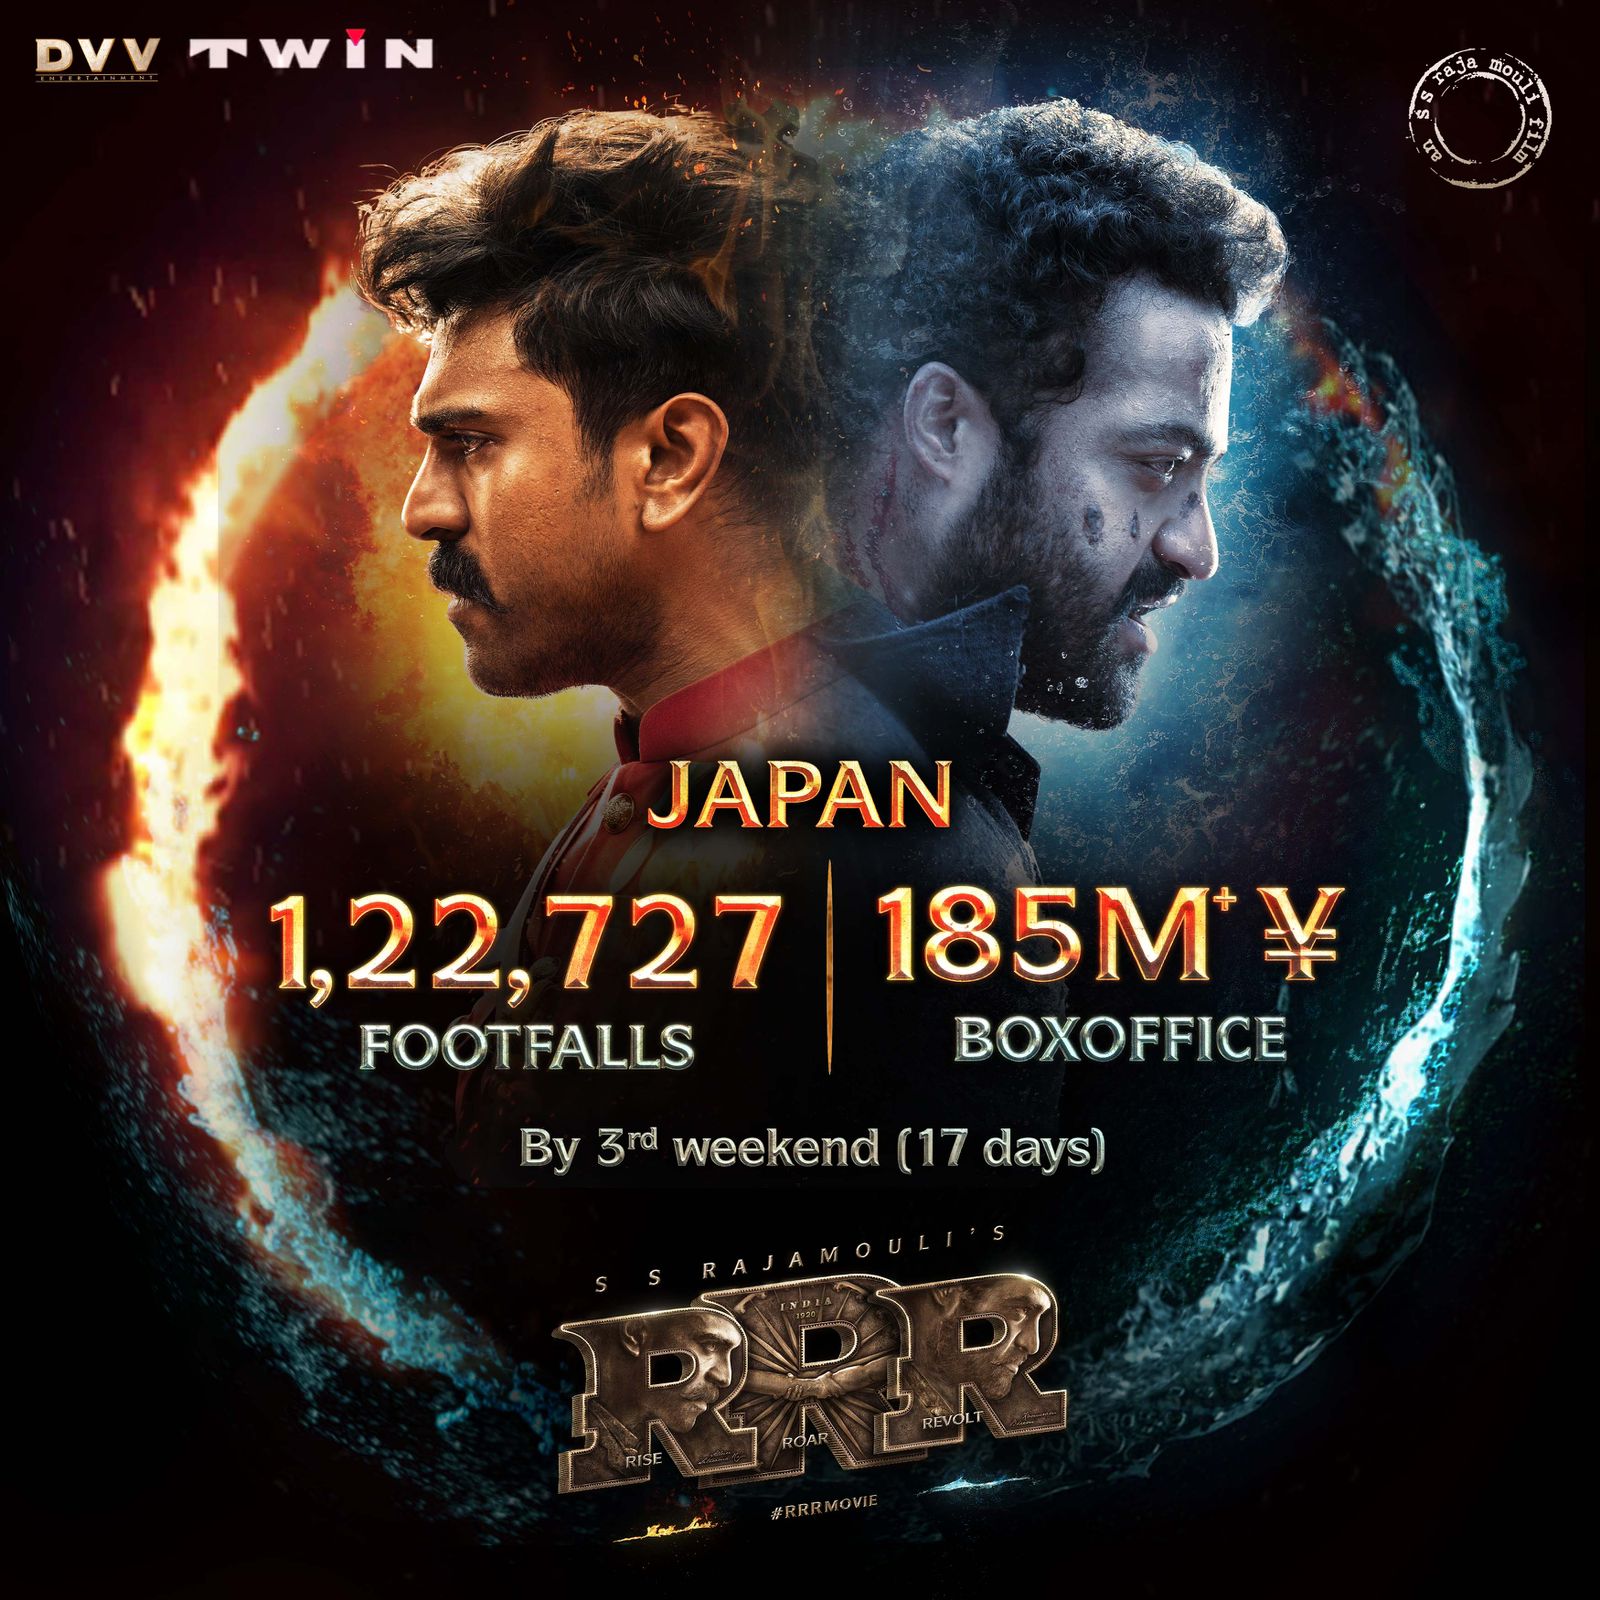 RRR Movie Box Office Collections And Records In Japan